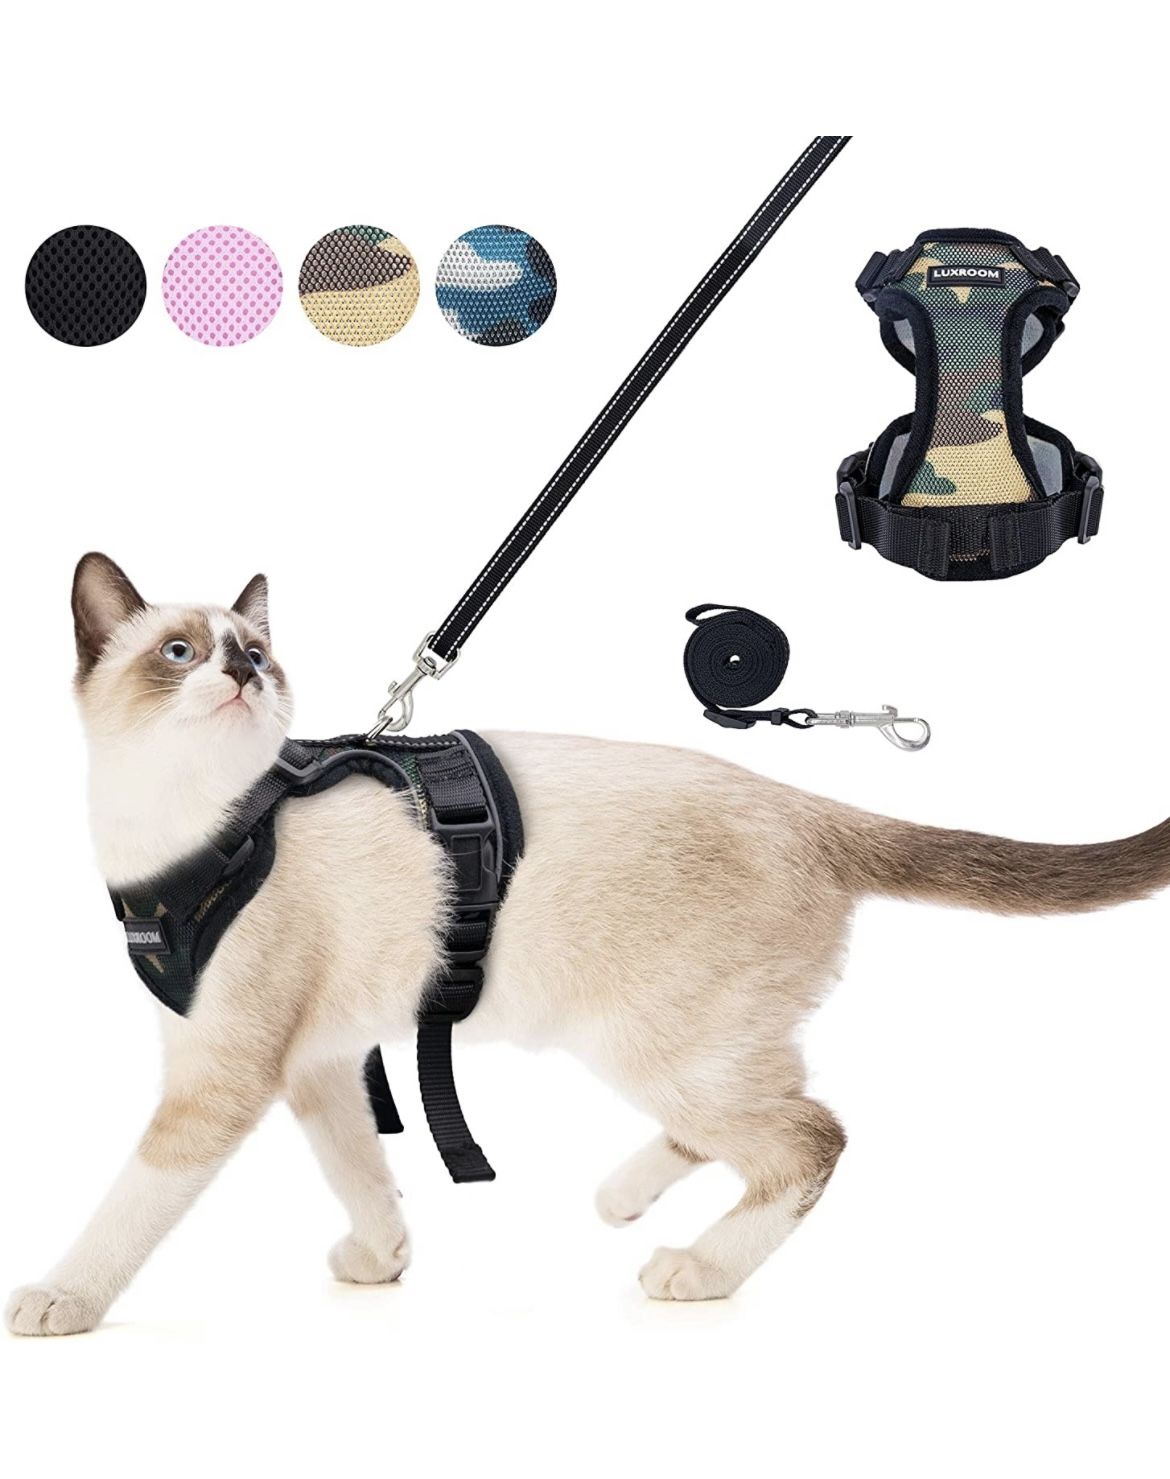 Cat Leash and Harness Set for Walking, Adjustable Breathable Kitten Harness and Leash with Safety Reflective Strap